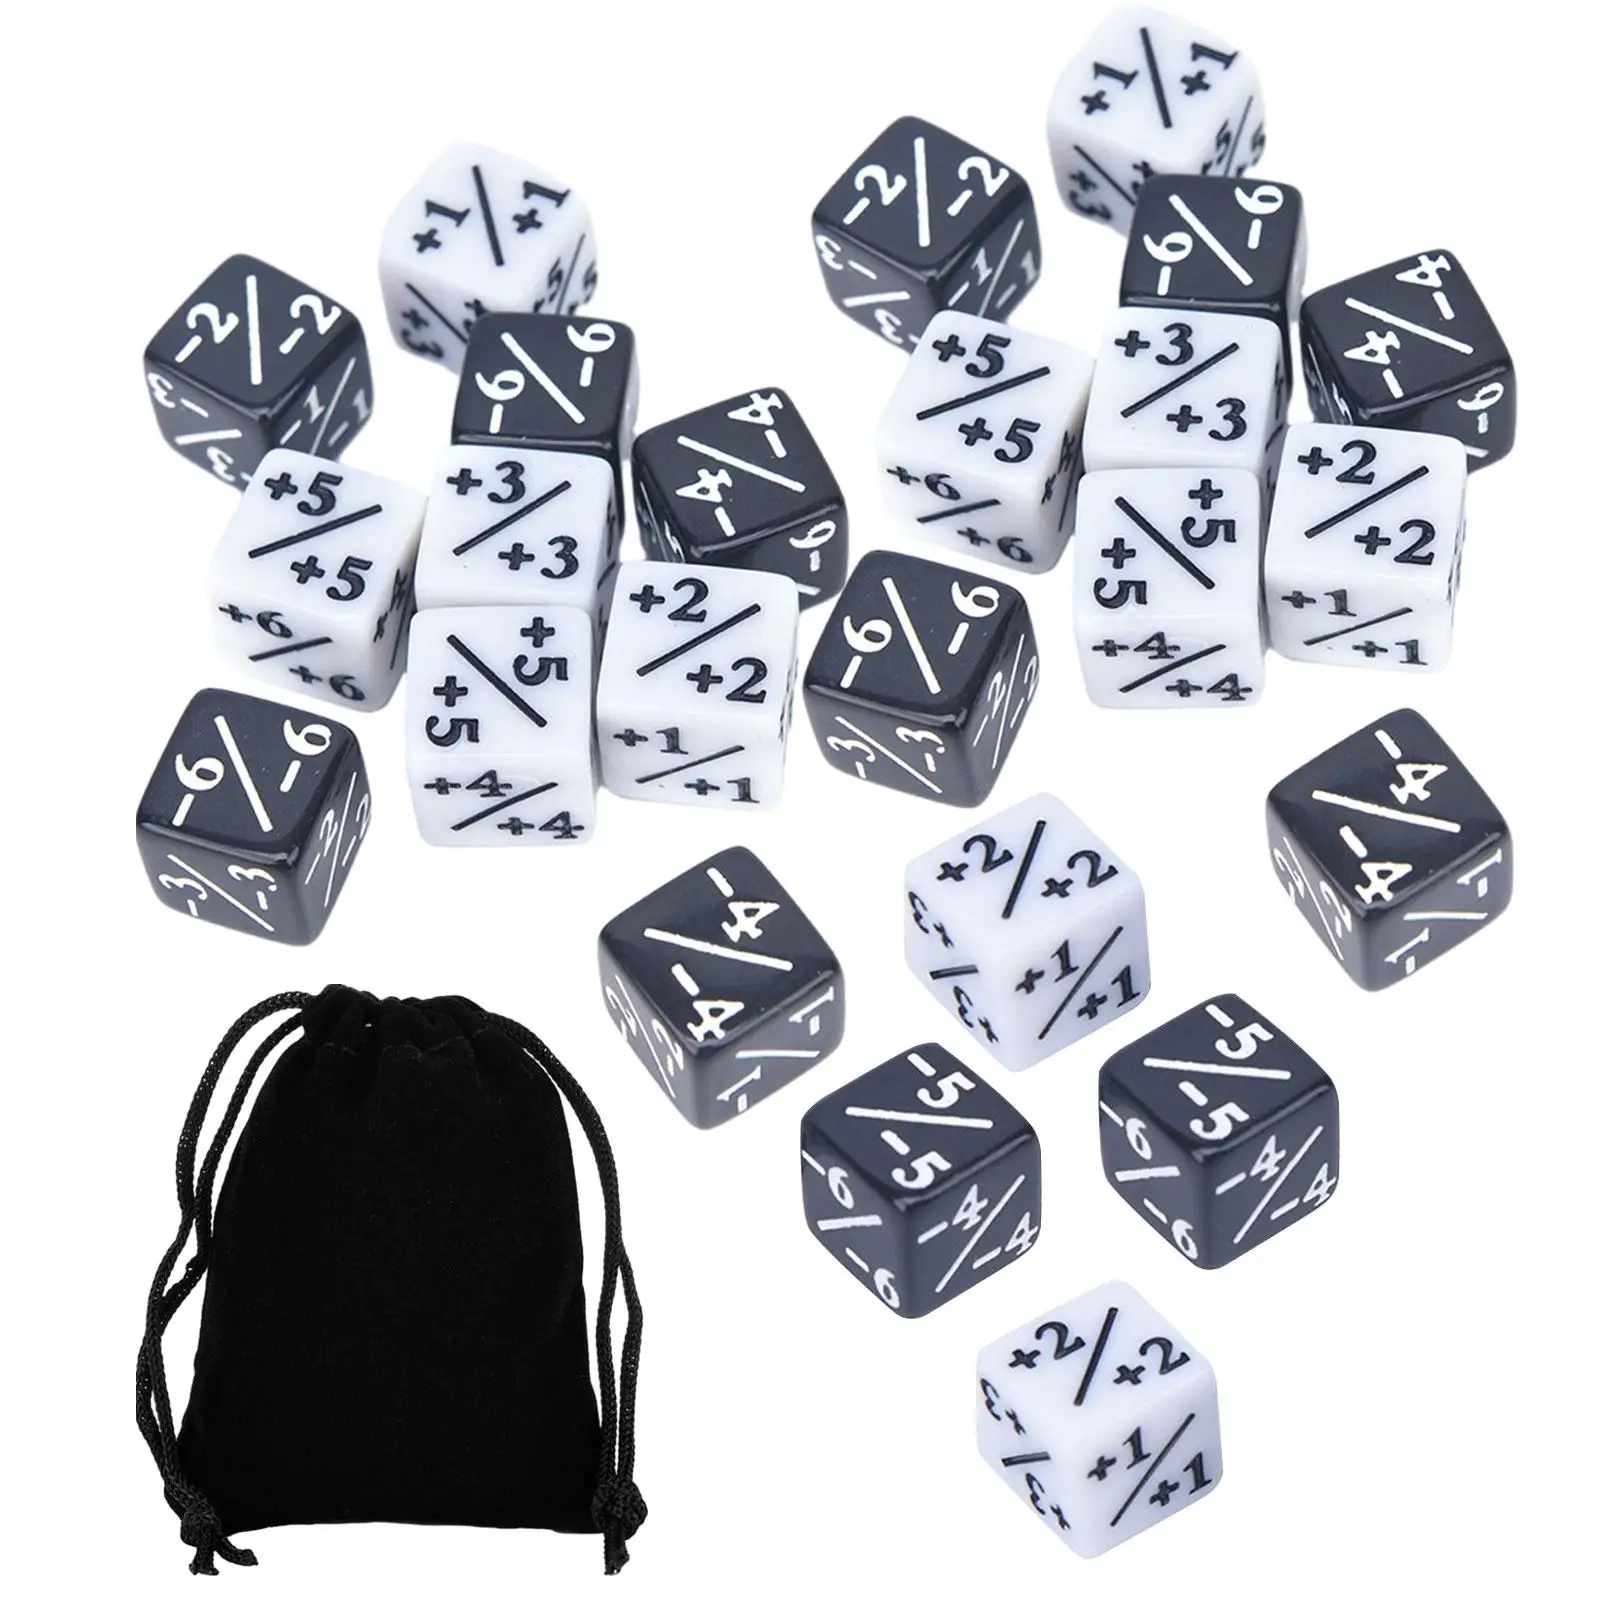 24 Pieces Counter Token Dice Acrylic Math Teaching for Party Favors Tabletop